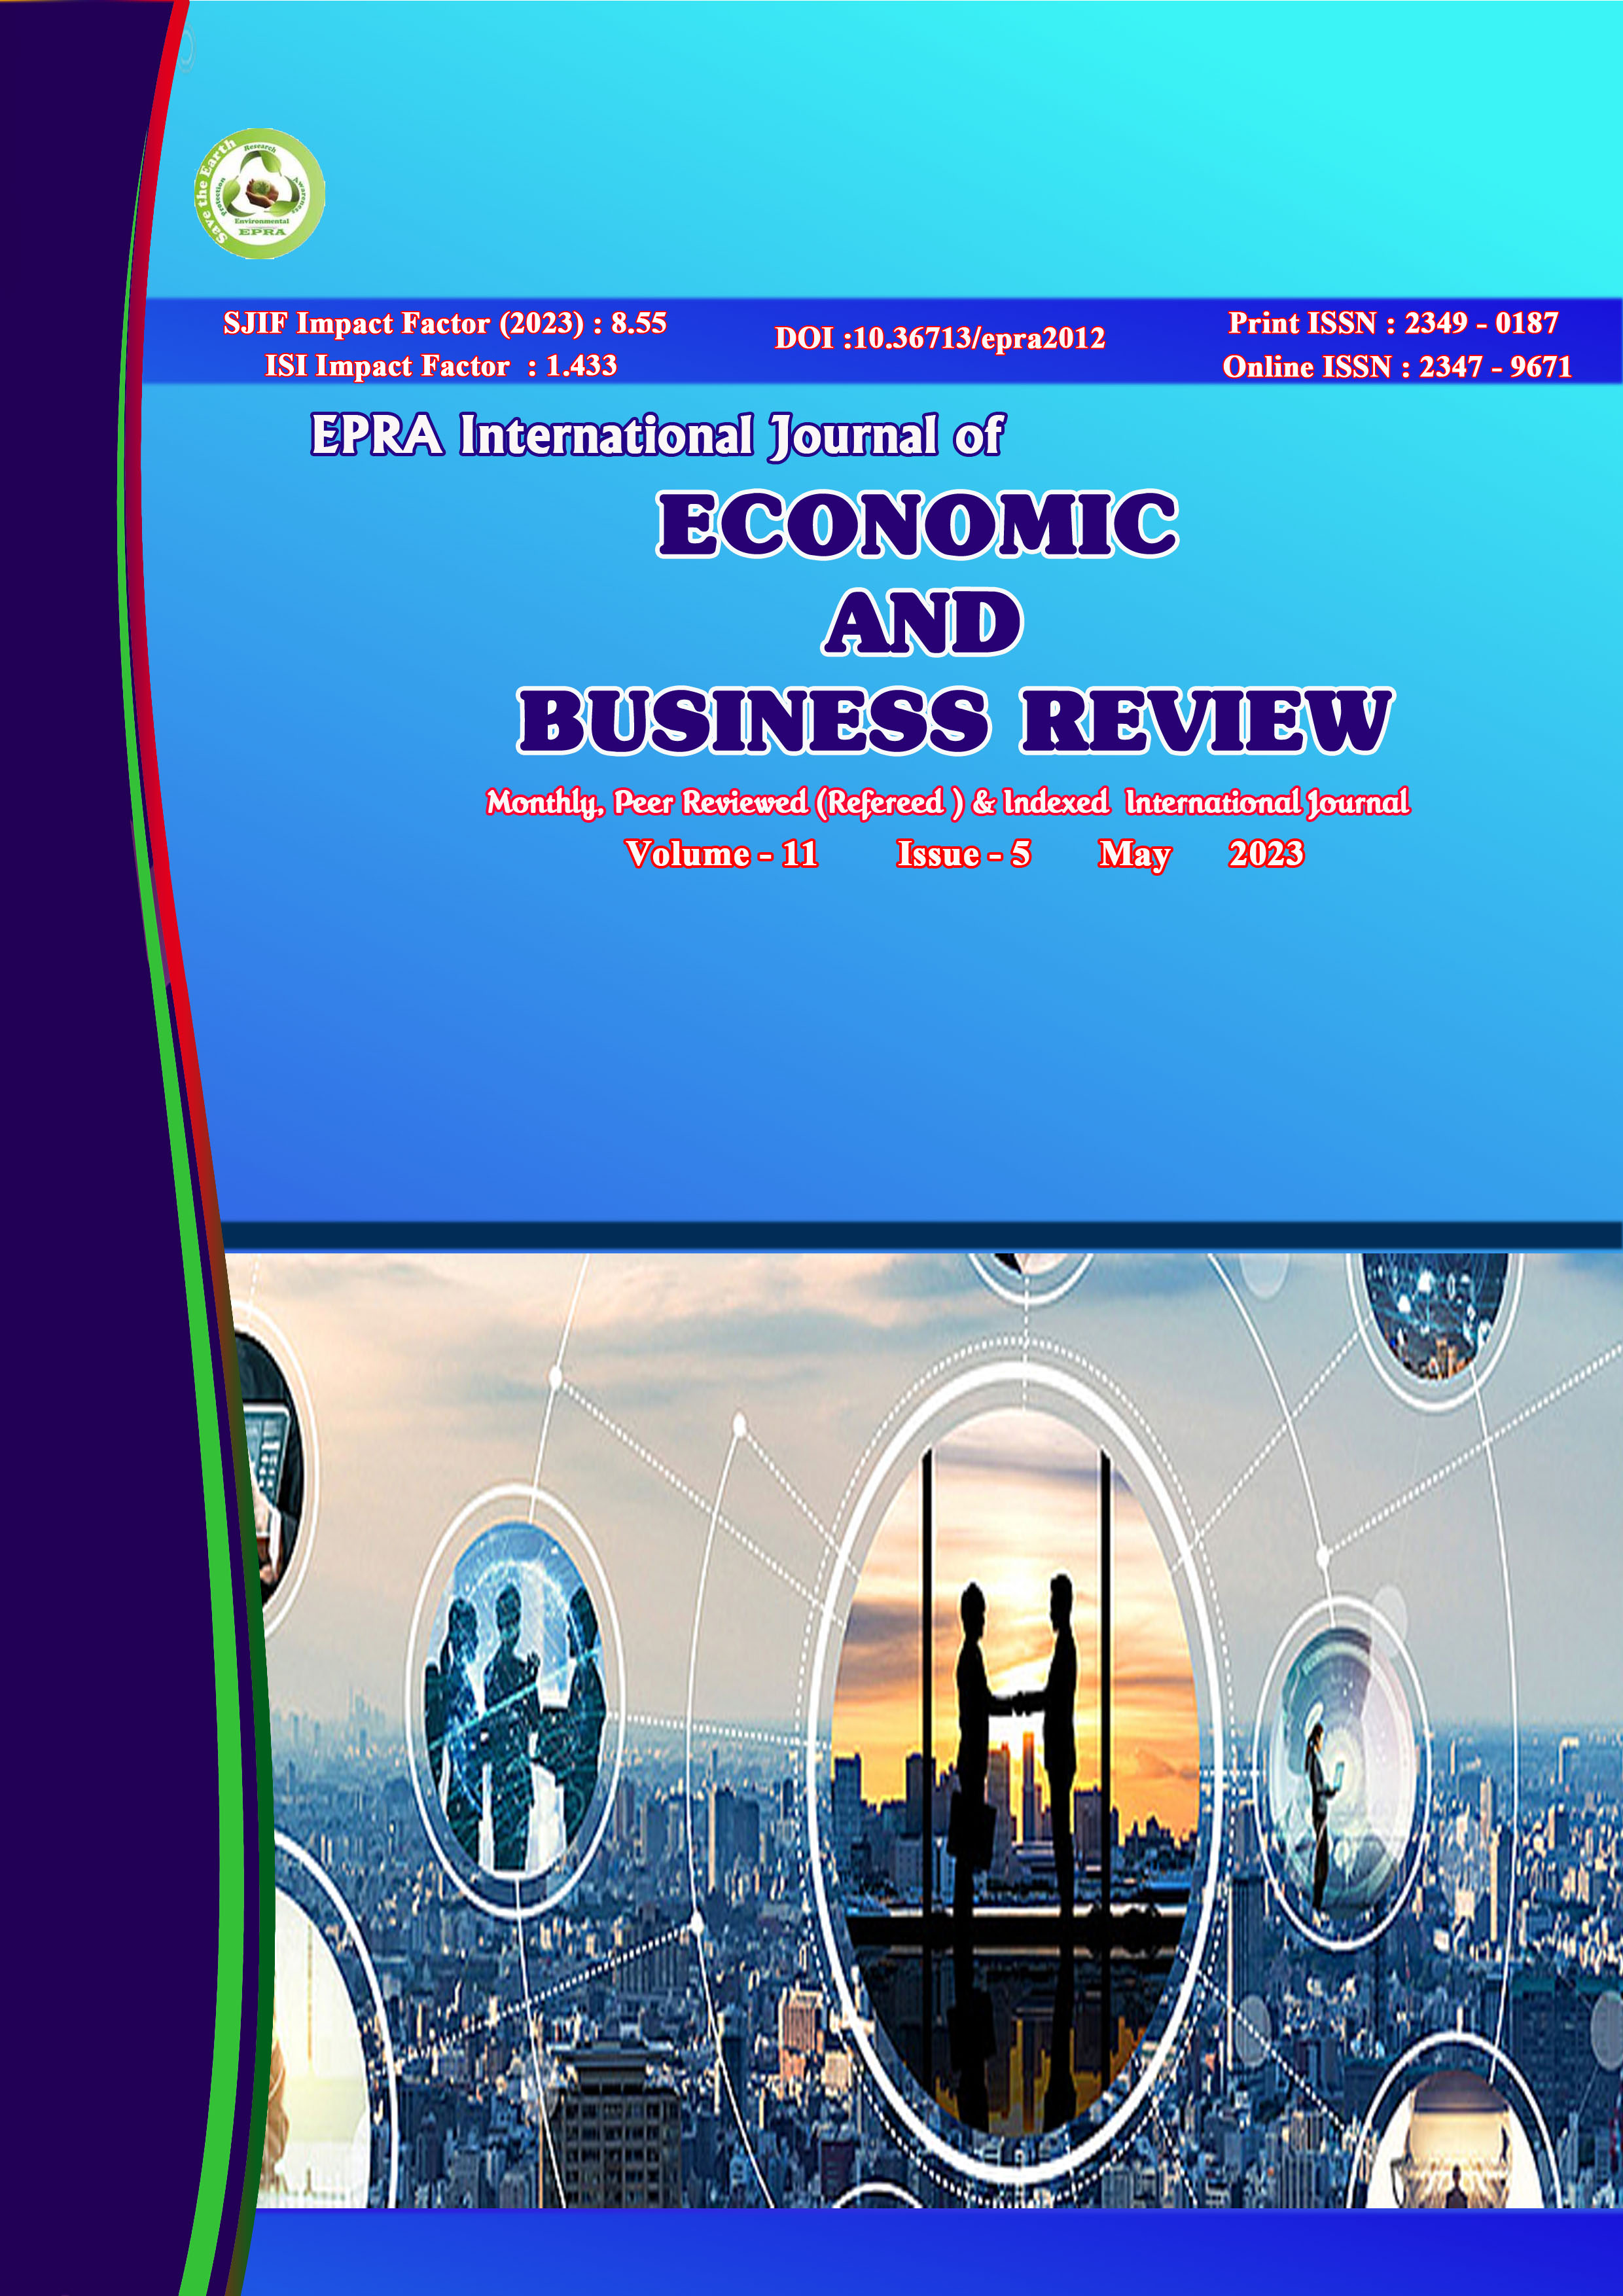 					View Vol. 11 No. 5 (2023): EPRA International Journal of Economic and Business Review(JEBR)
				